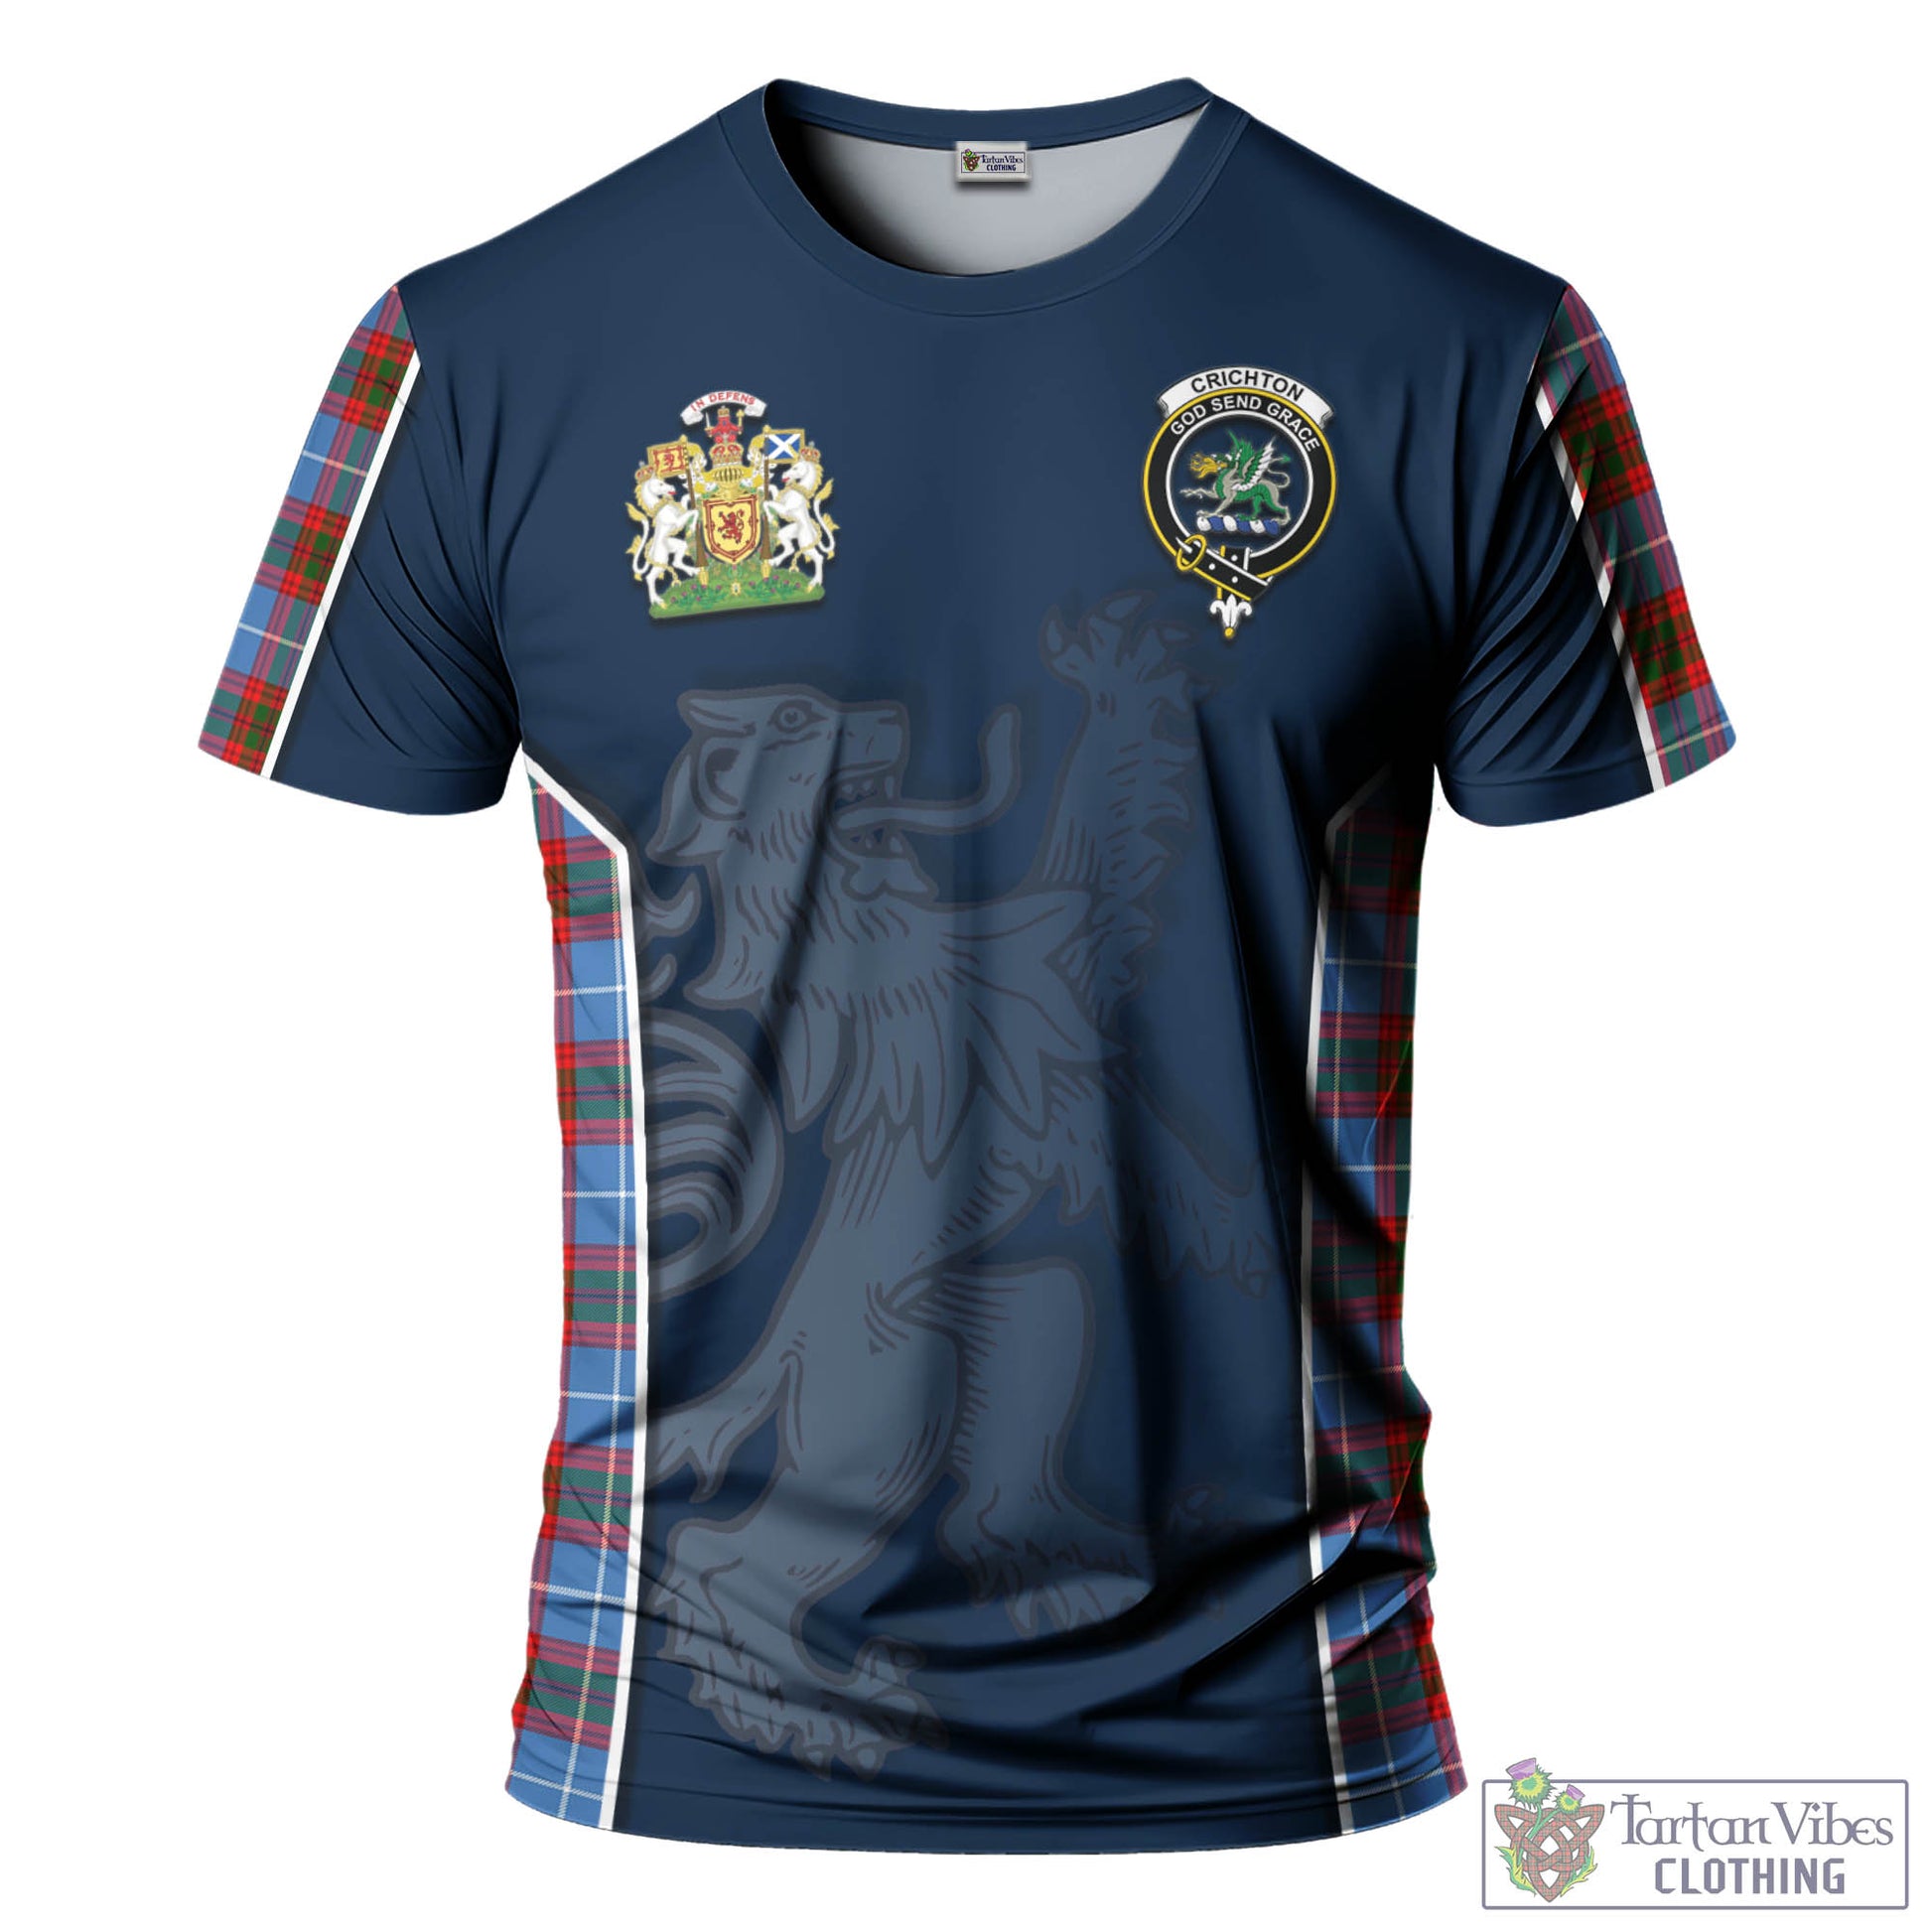 Tartan Vibes Clothing Crichton Tartan T-Shirt with Family Crest and Lion Rampant Vibes Sport Style